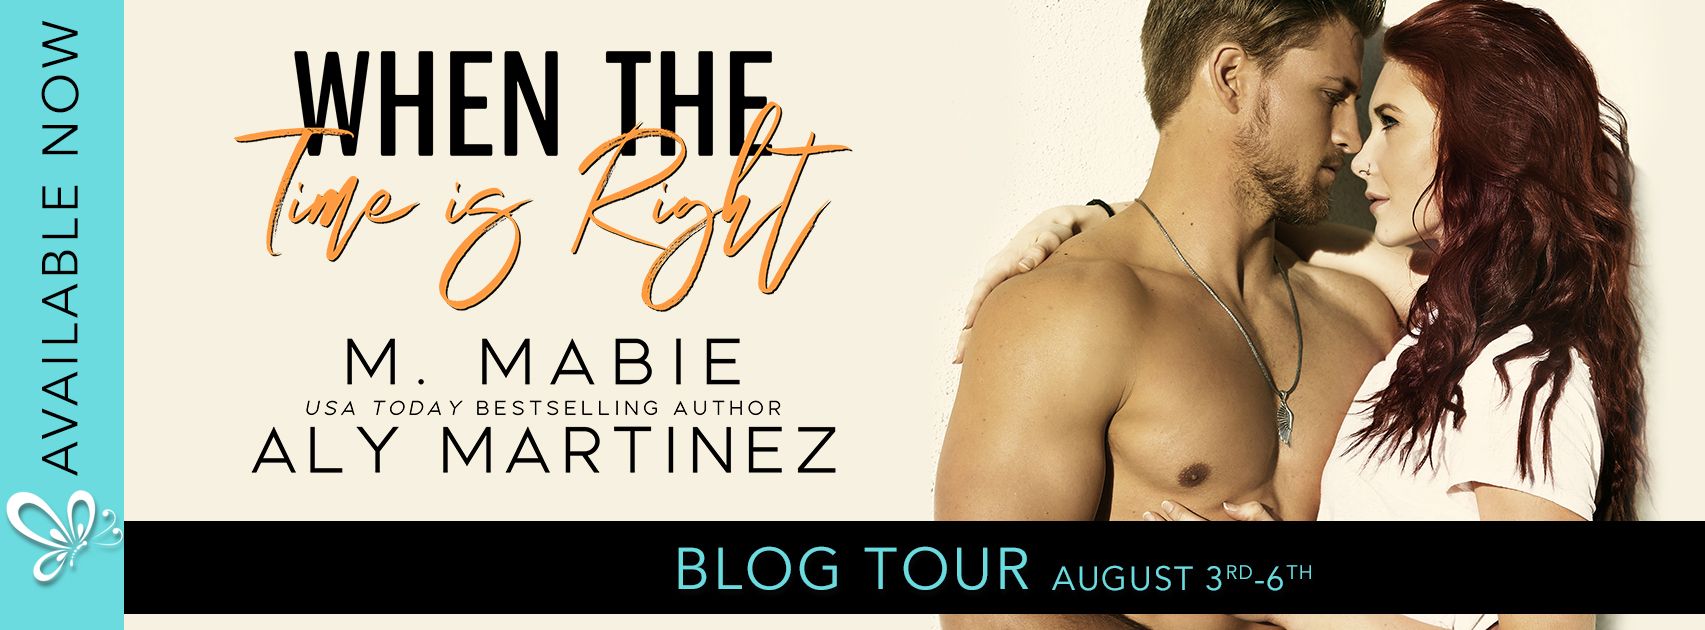 ✶Blog Tour✶ Review: When the Time is Right by Aly Martinez and M. Mabie